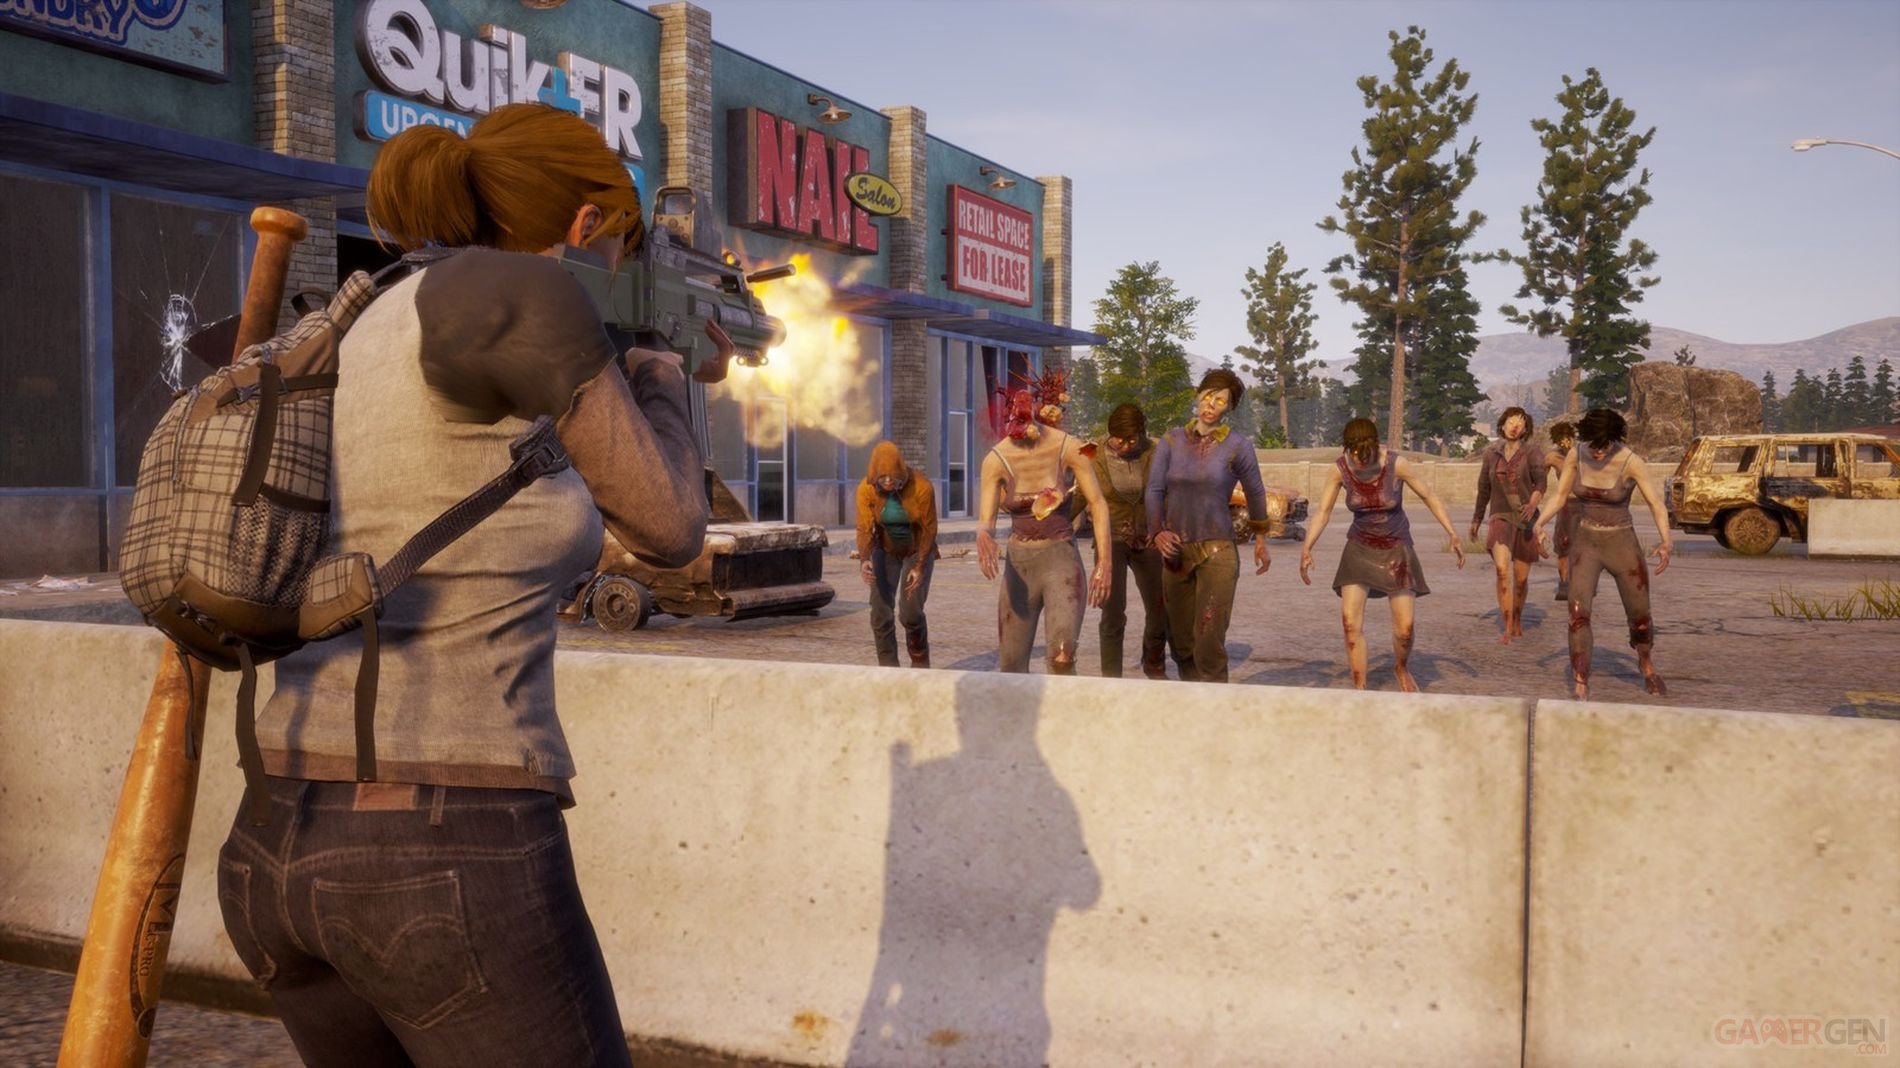 Phil Spencer is Excited About the Advancements in State of Decay 3